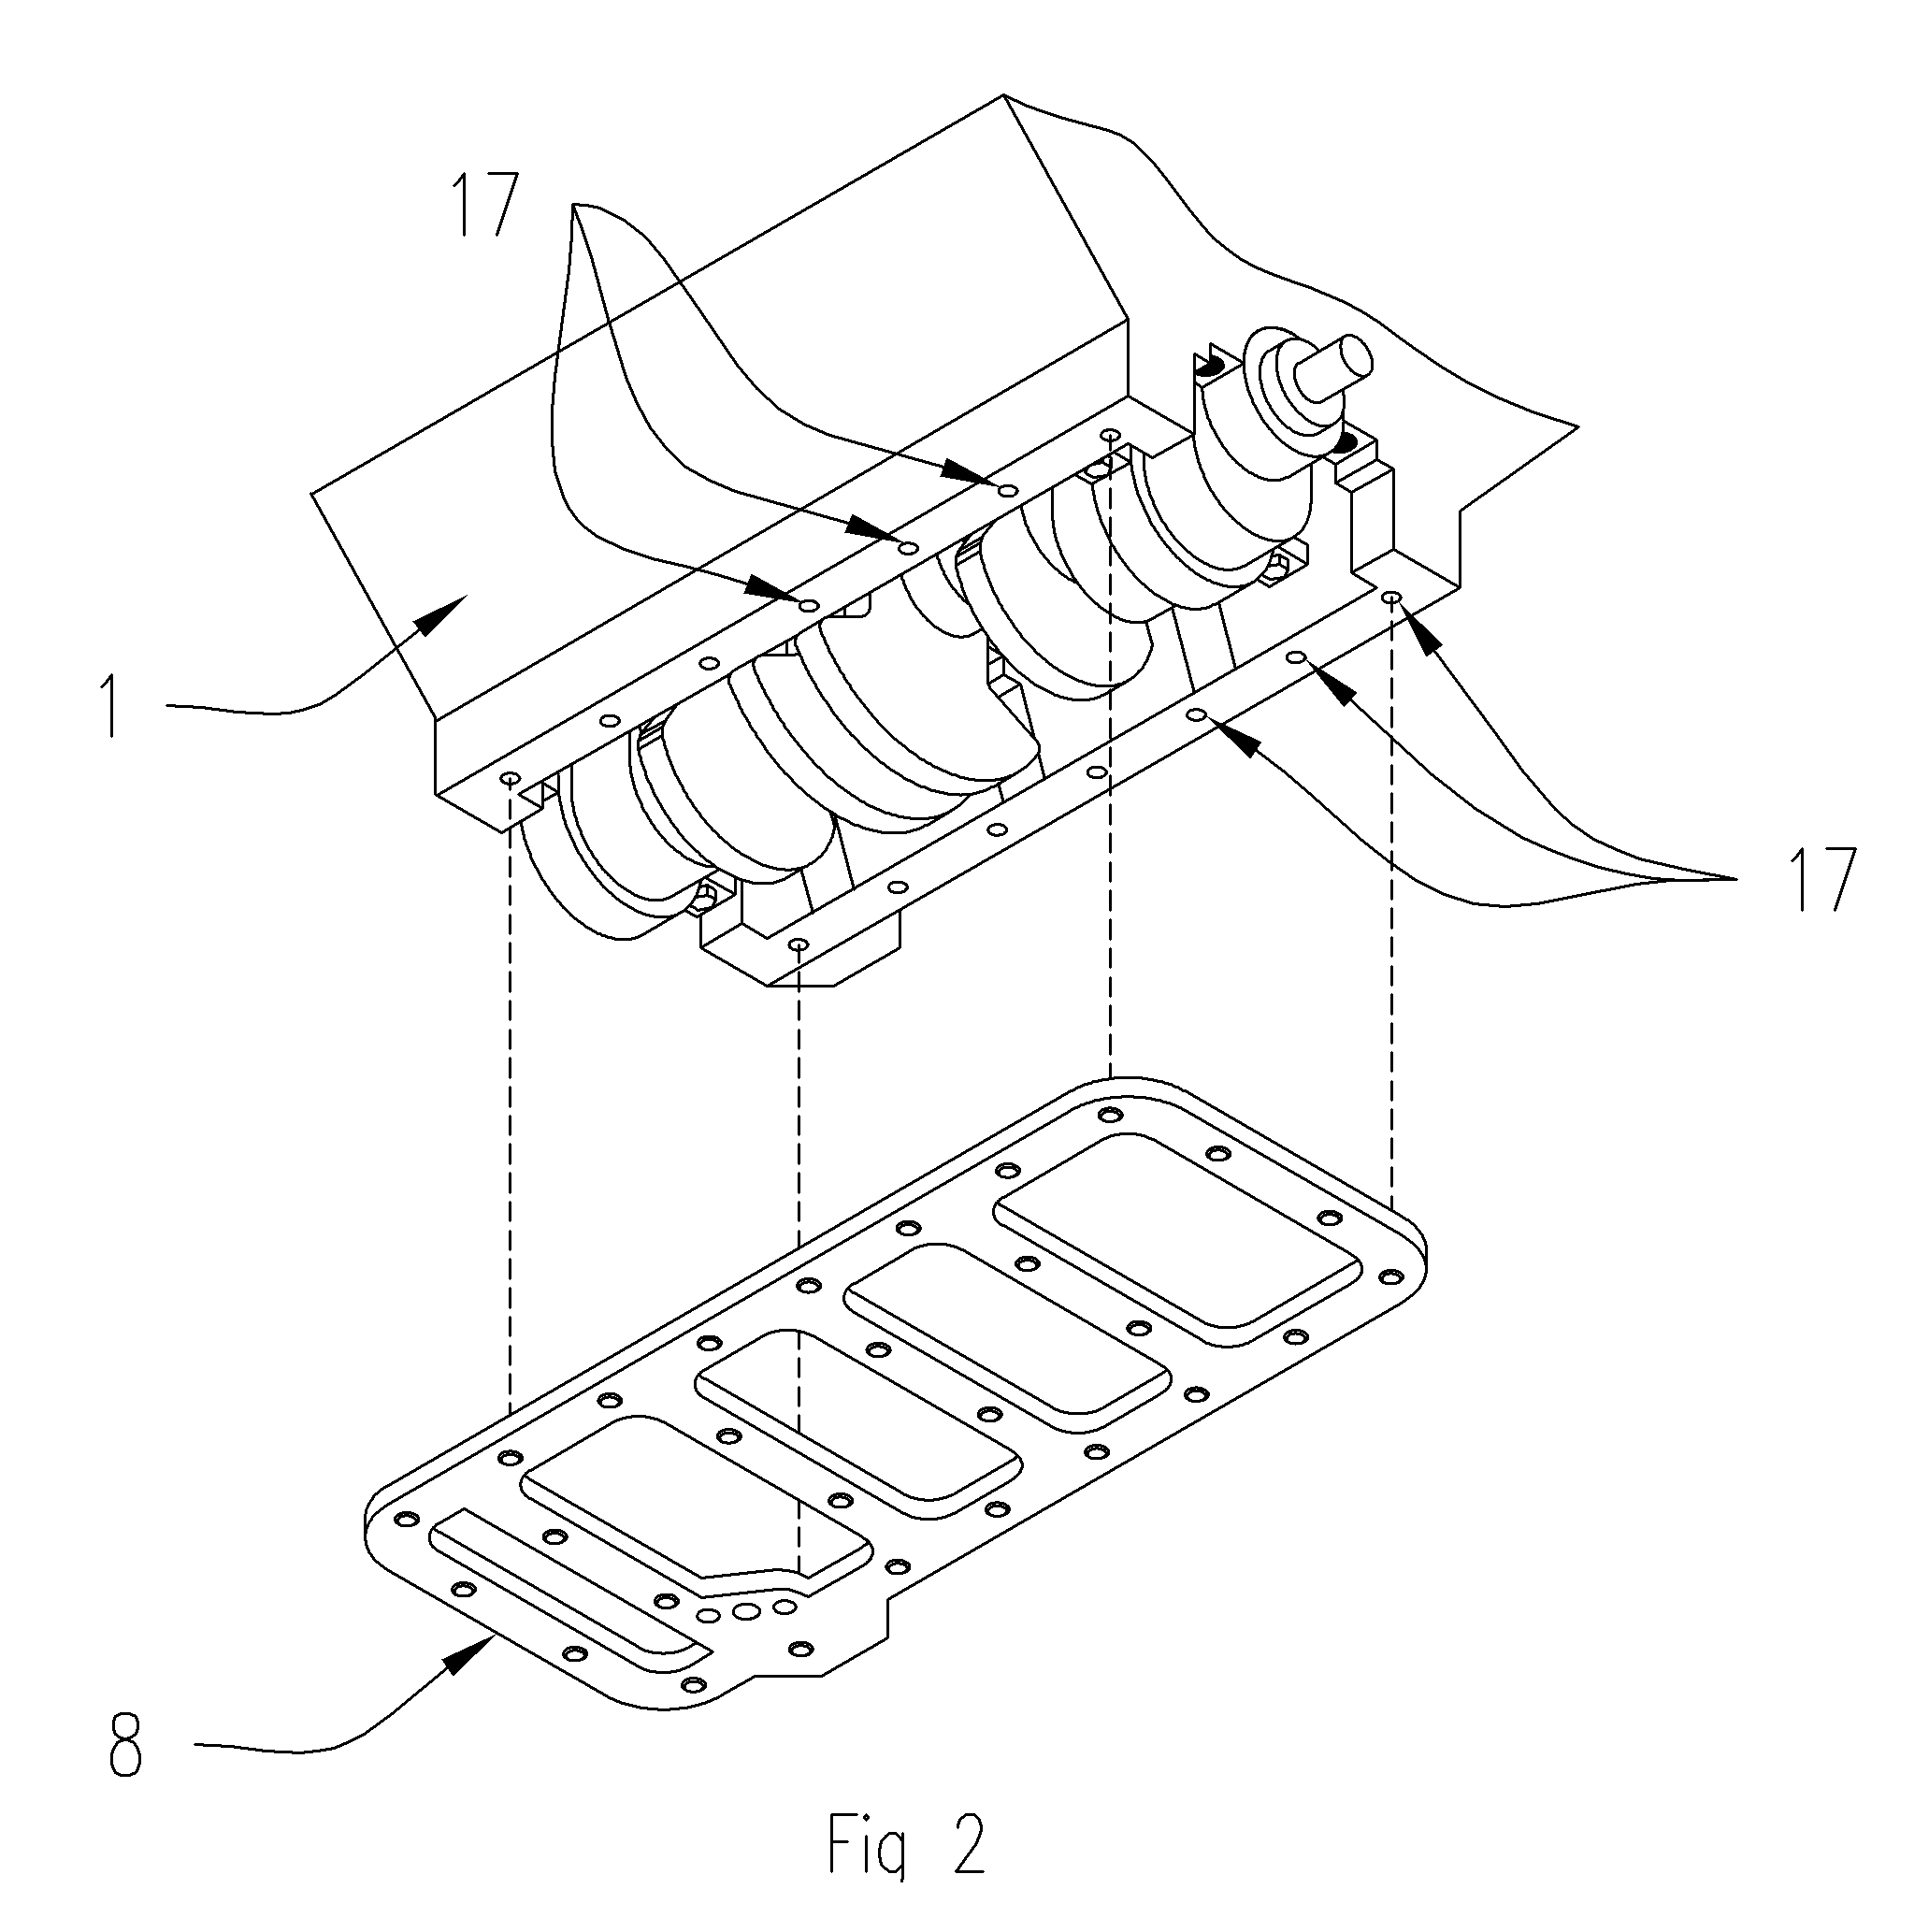 Internal support structure for an internal combustion engine